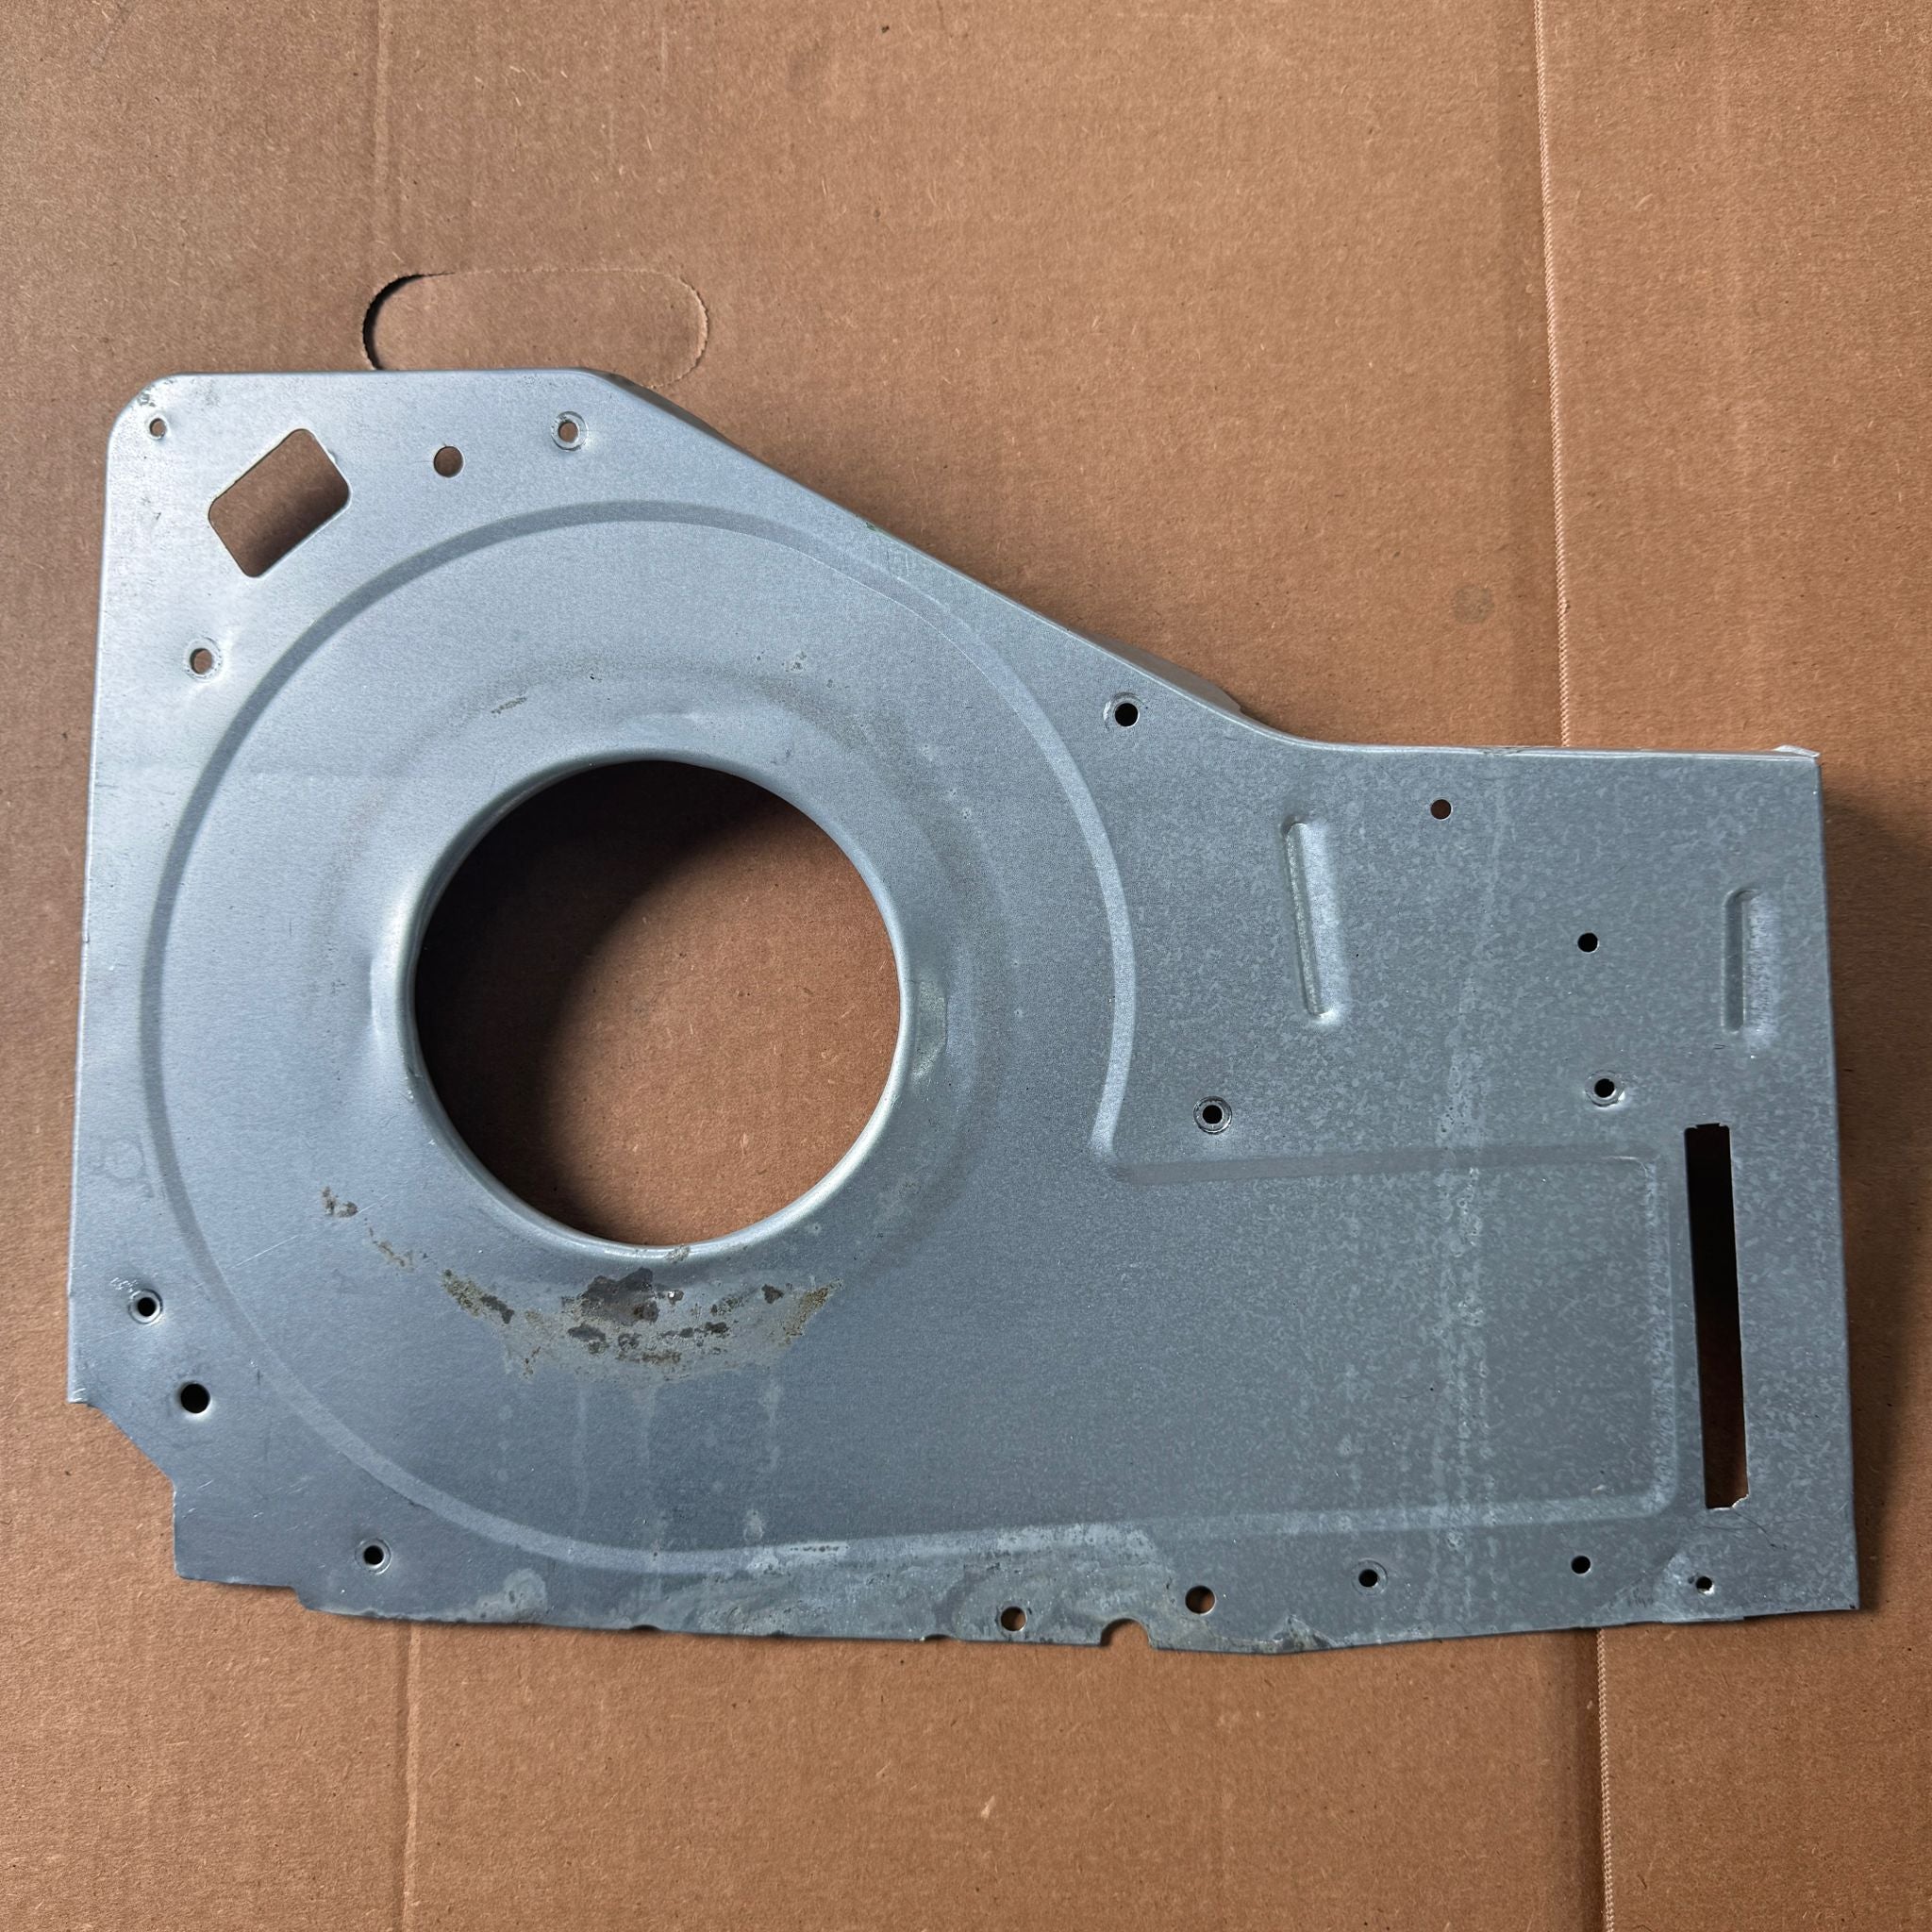 GE-Dryer-Blower-Housing-Aseembly-WE03X23859